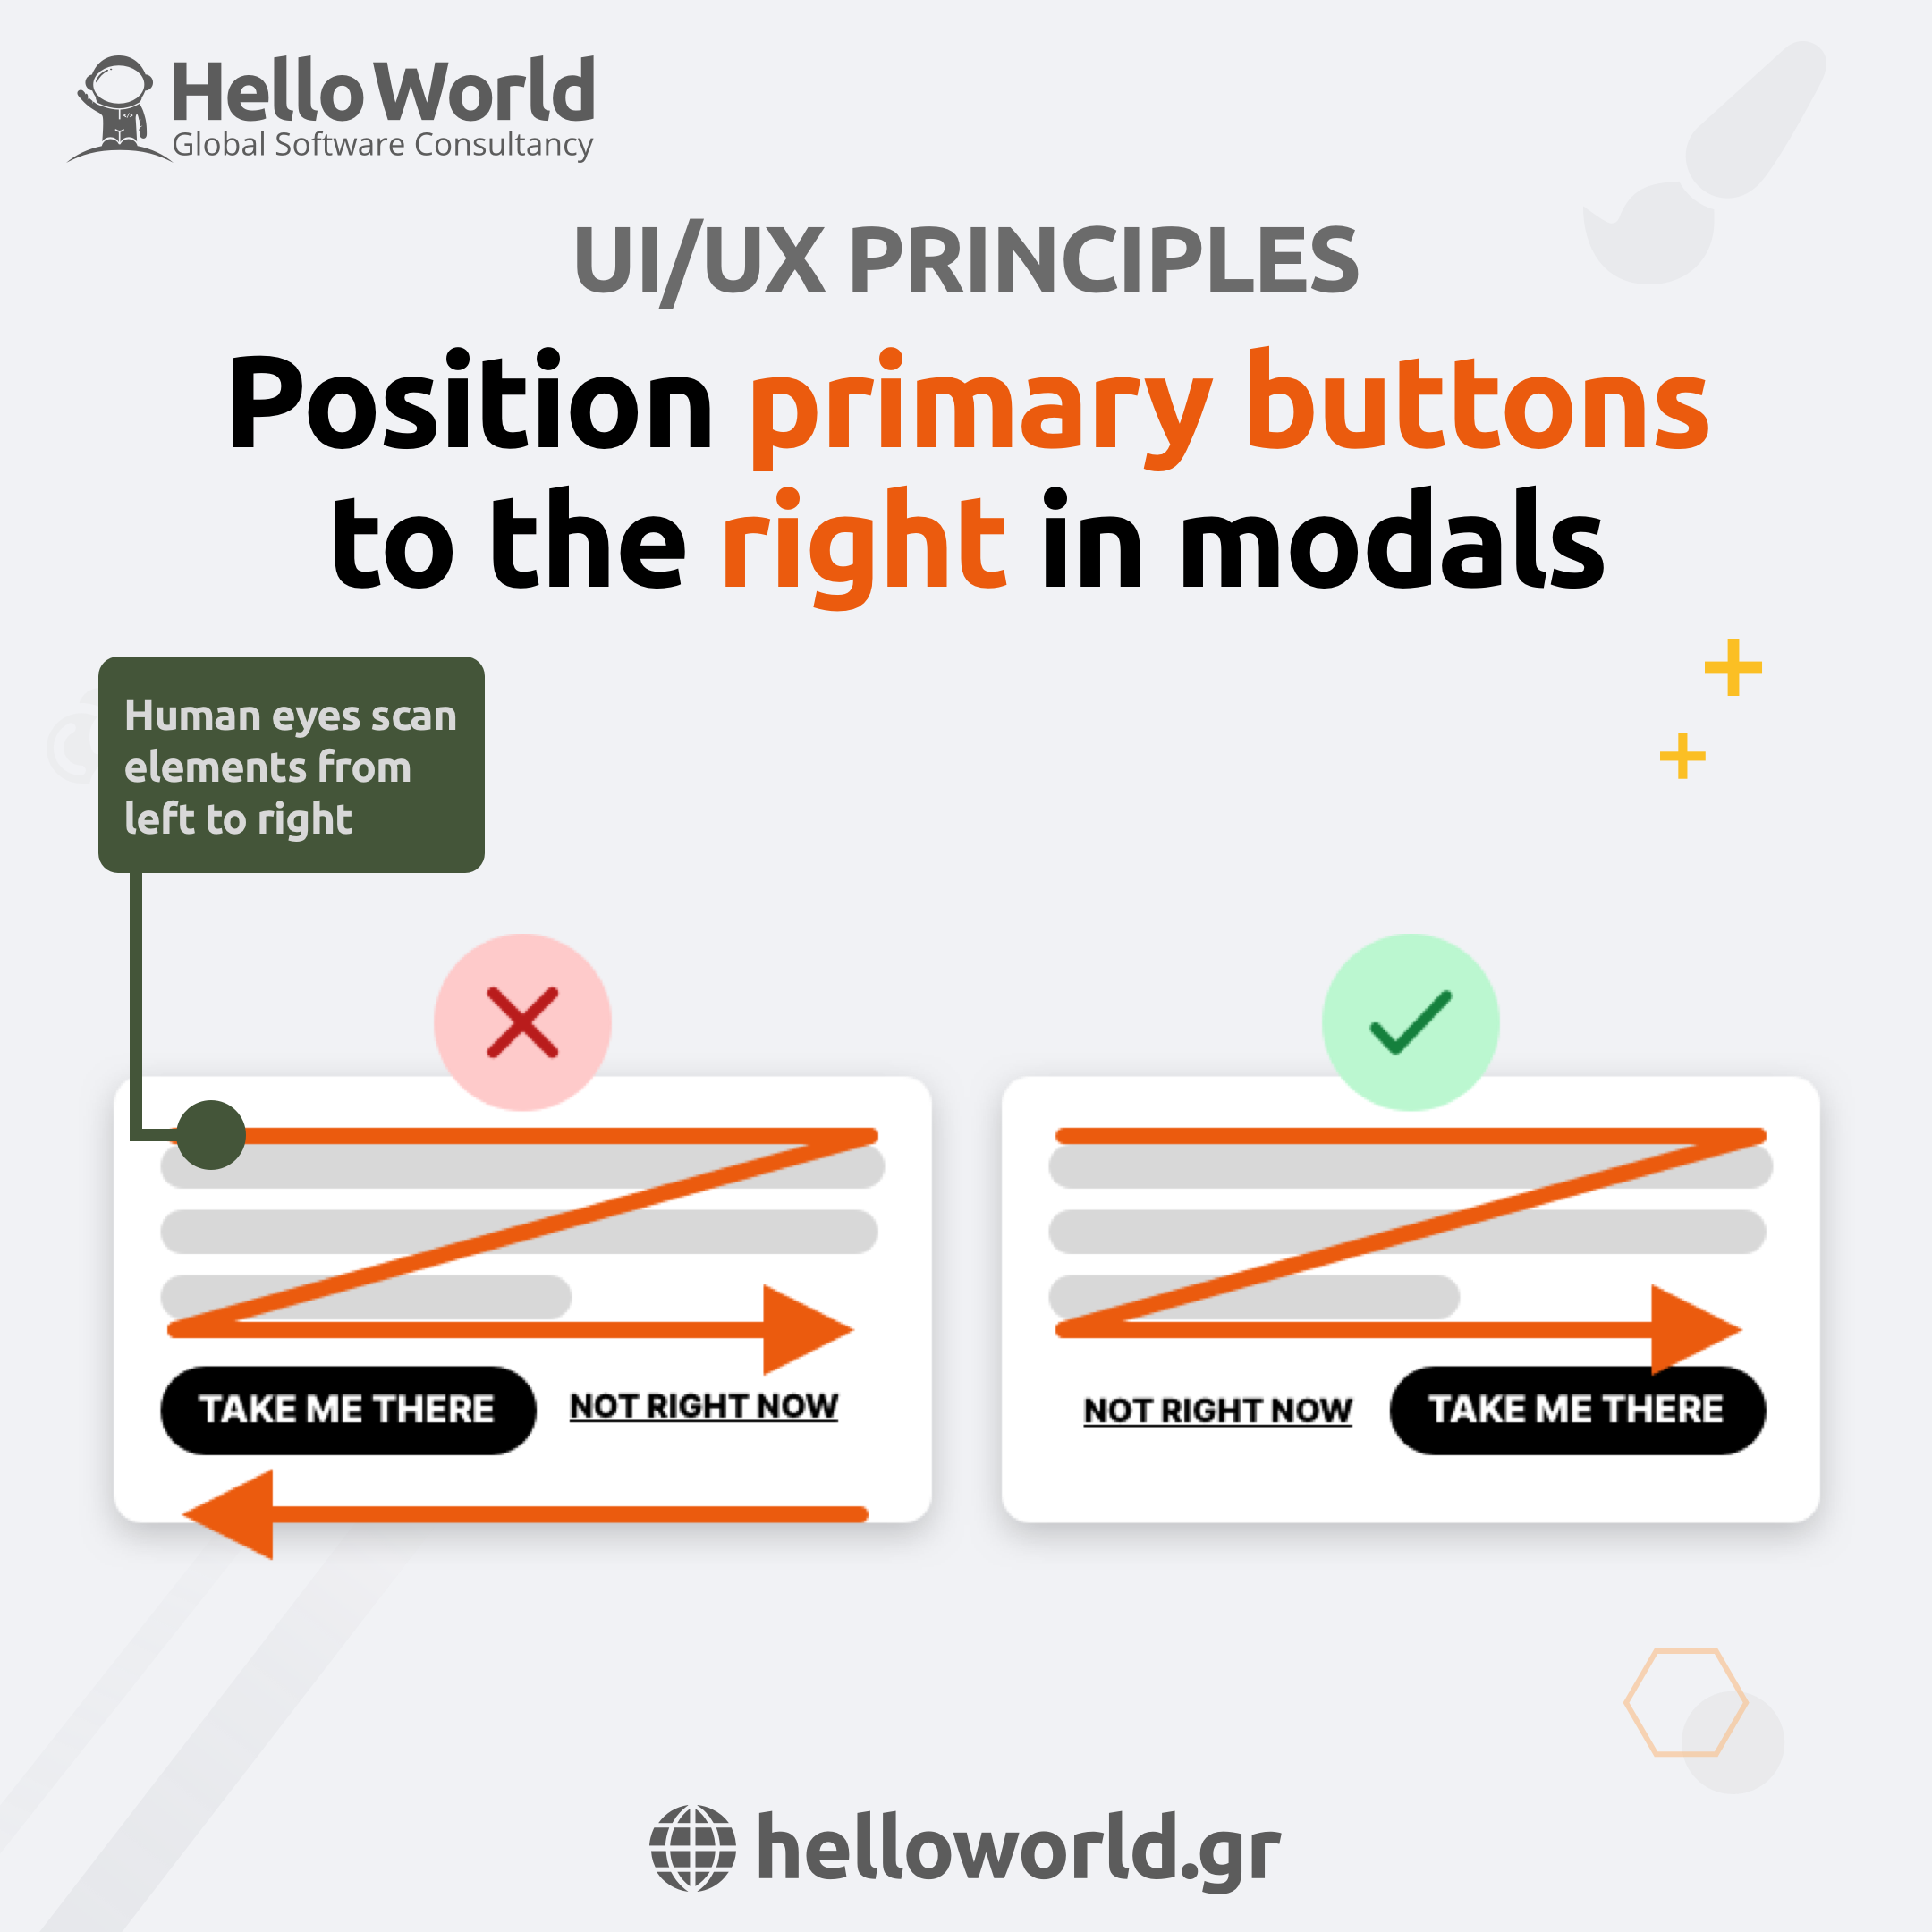 Position primary buttons to the right in modals